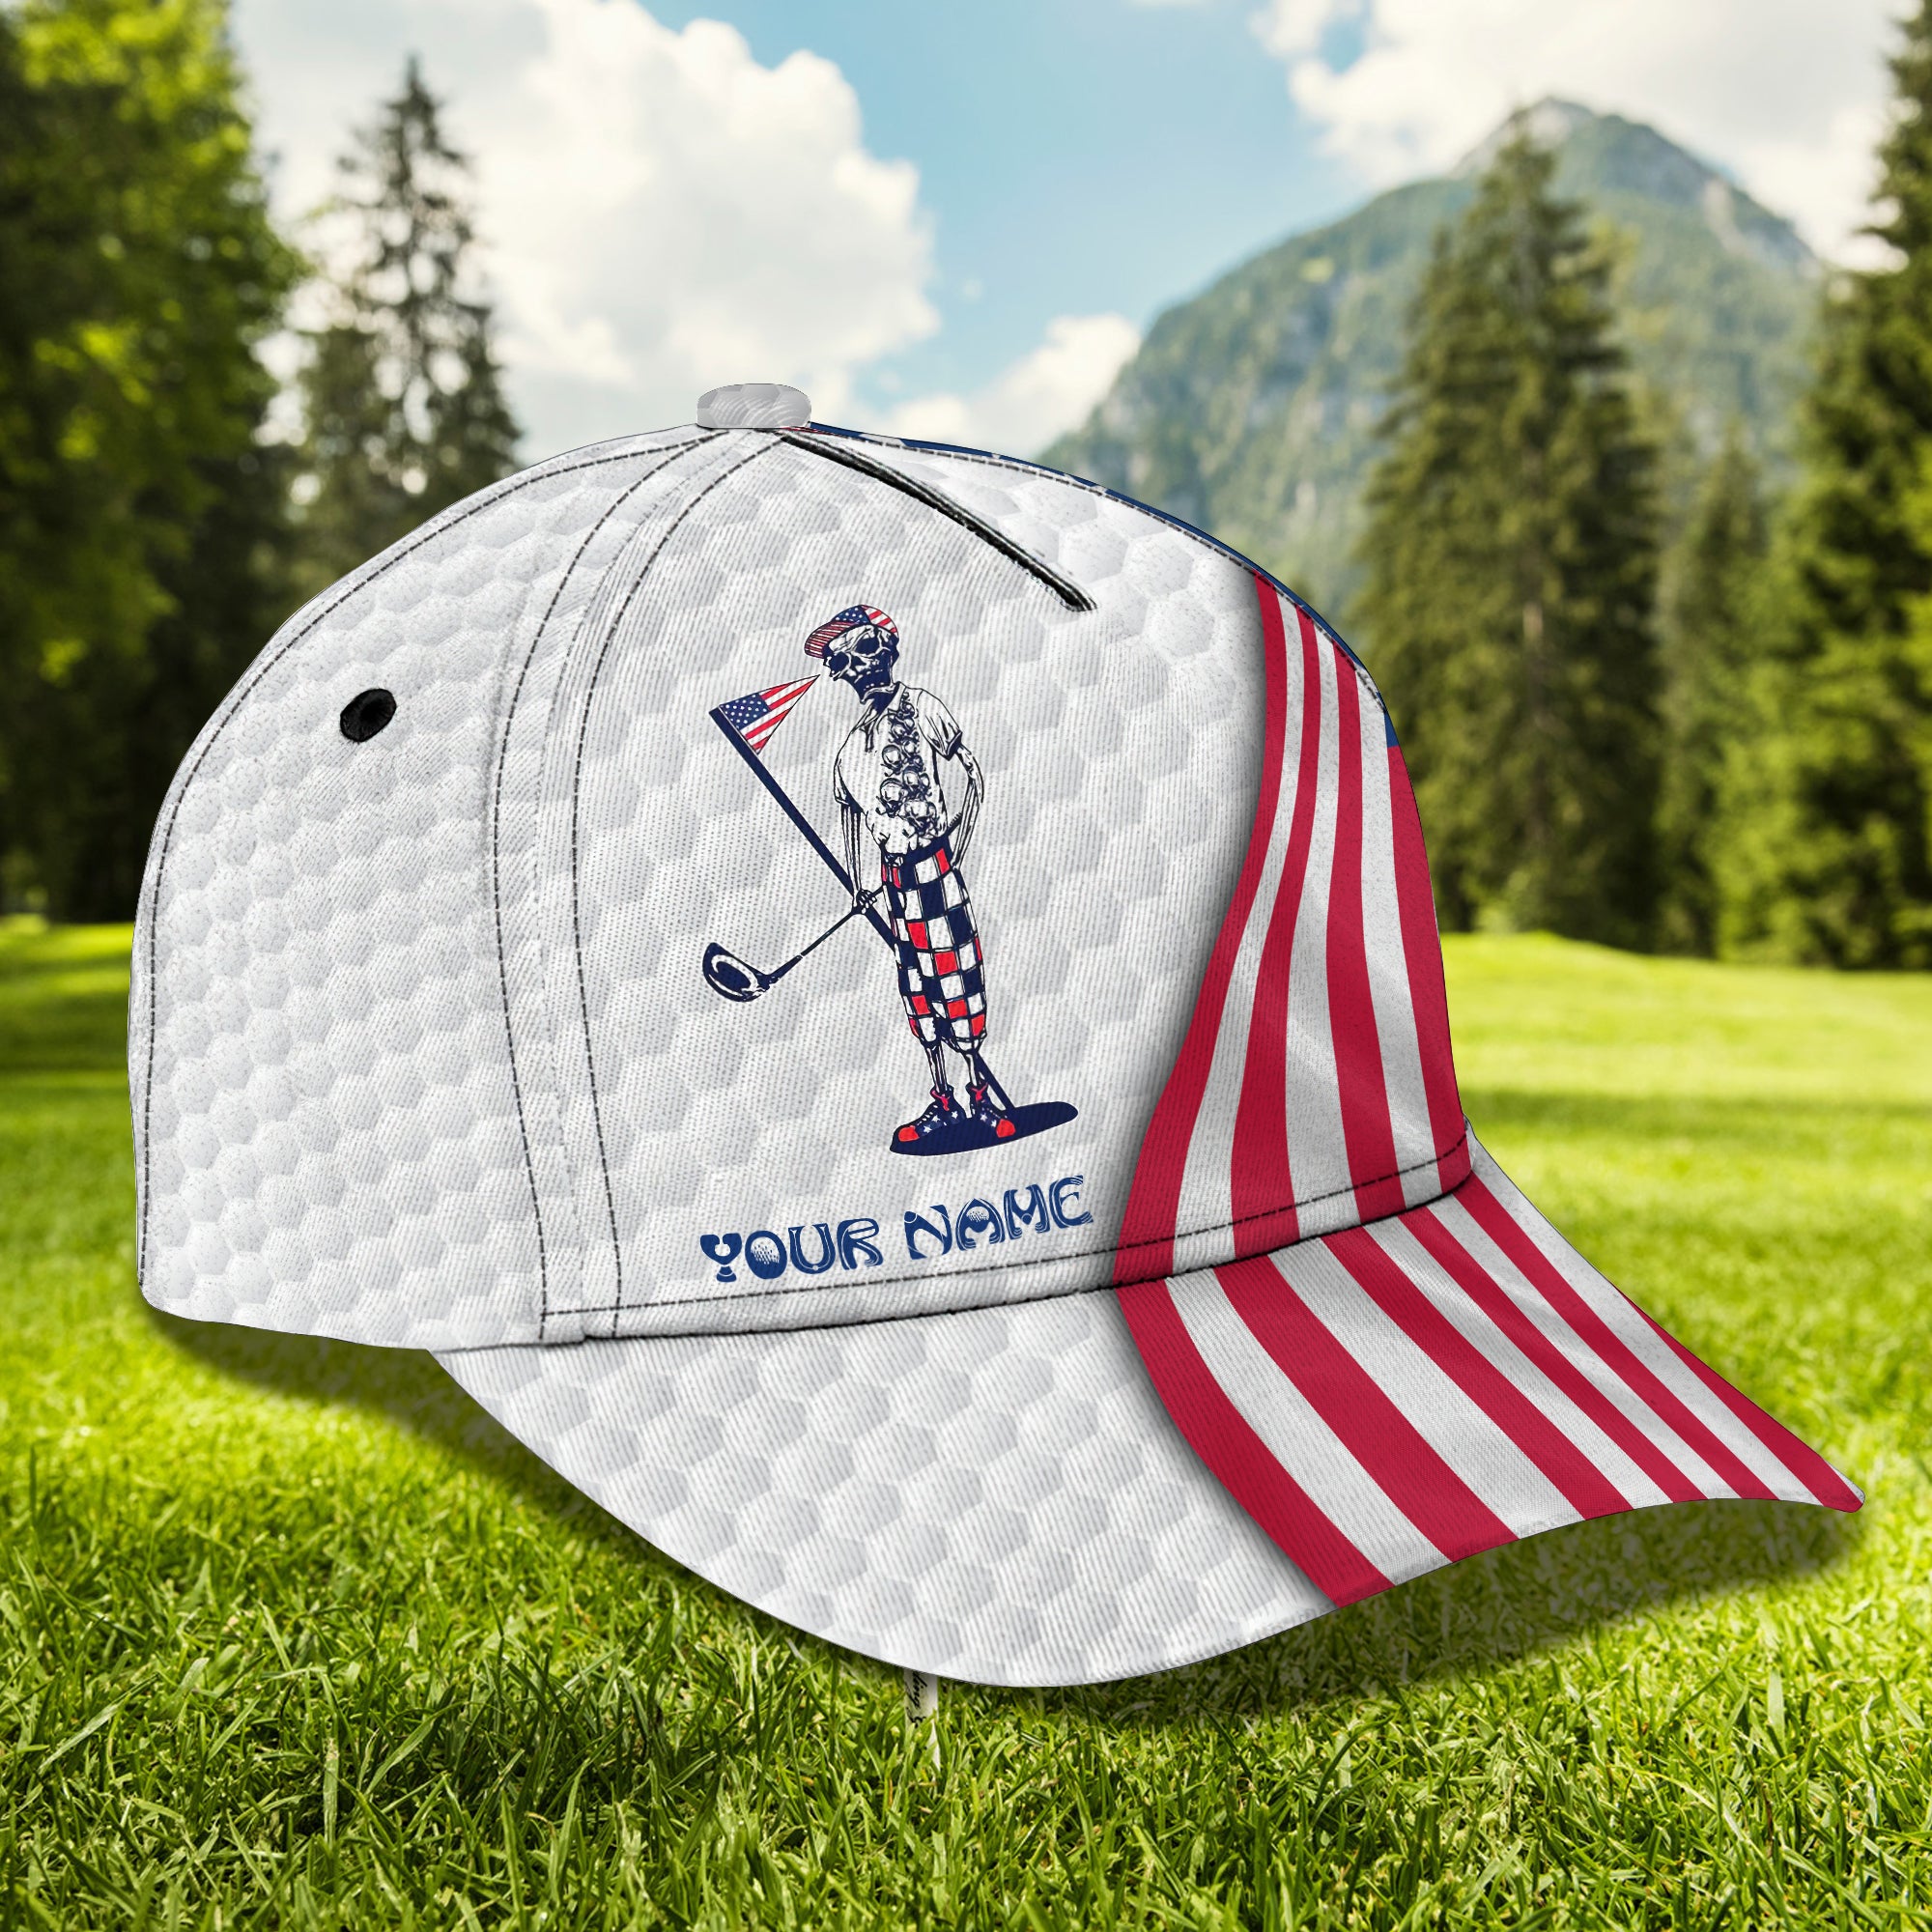 Golf 5 - Personalized Name Cap - HY97